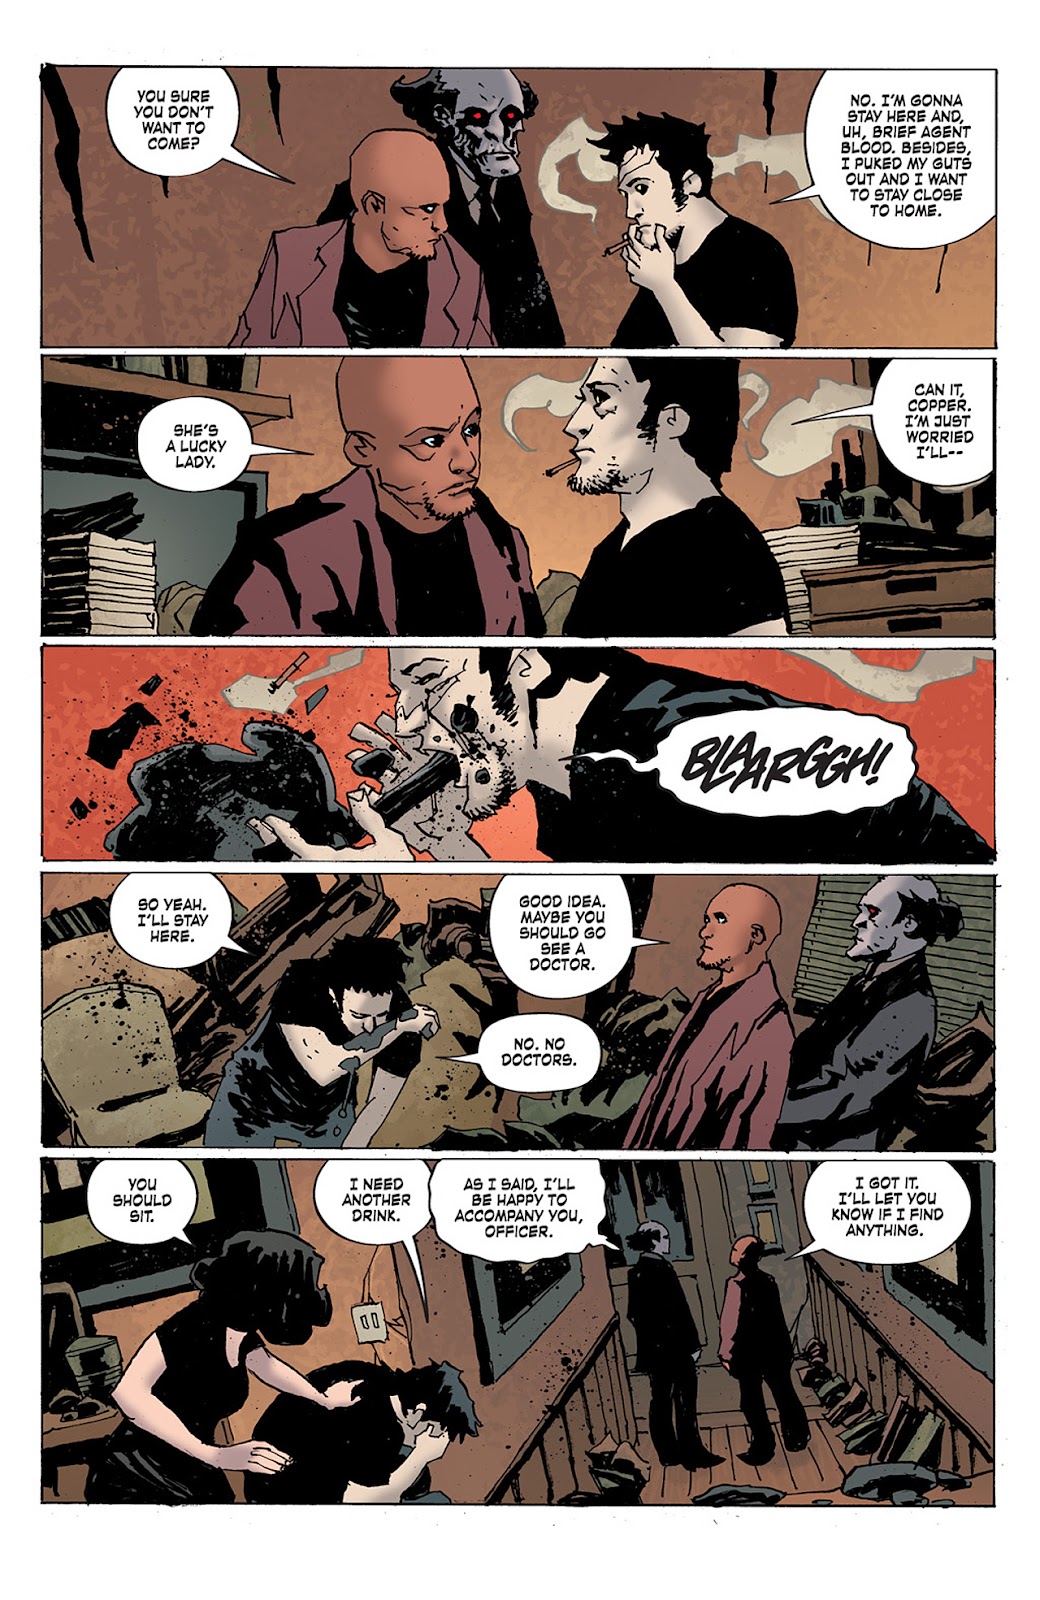 Criminal Macabre: Final Night - The 30 Days of Night Crossover issue 2 - Page 9